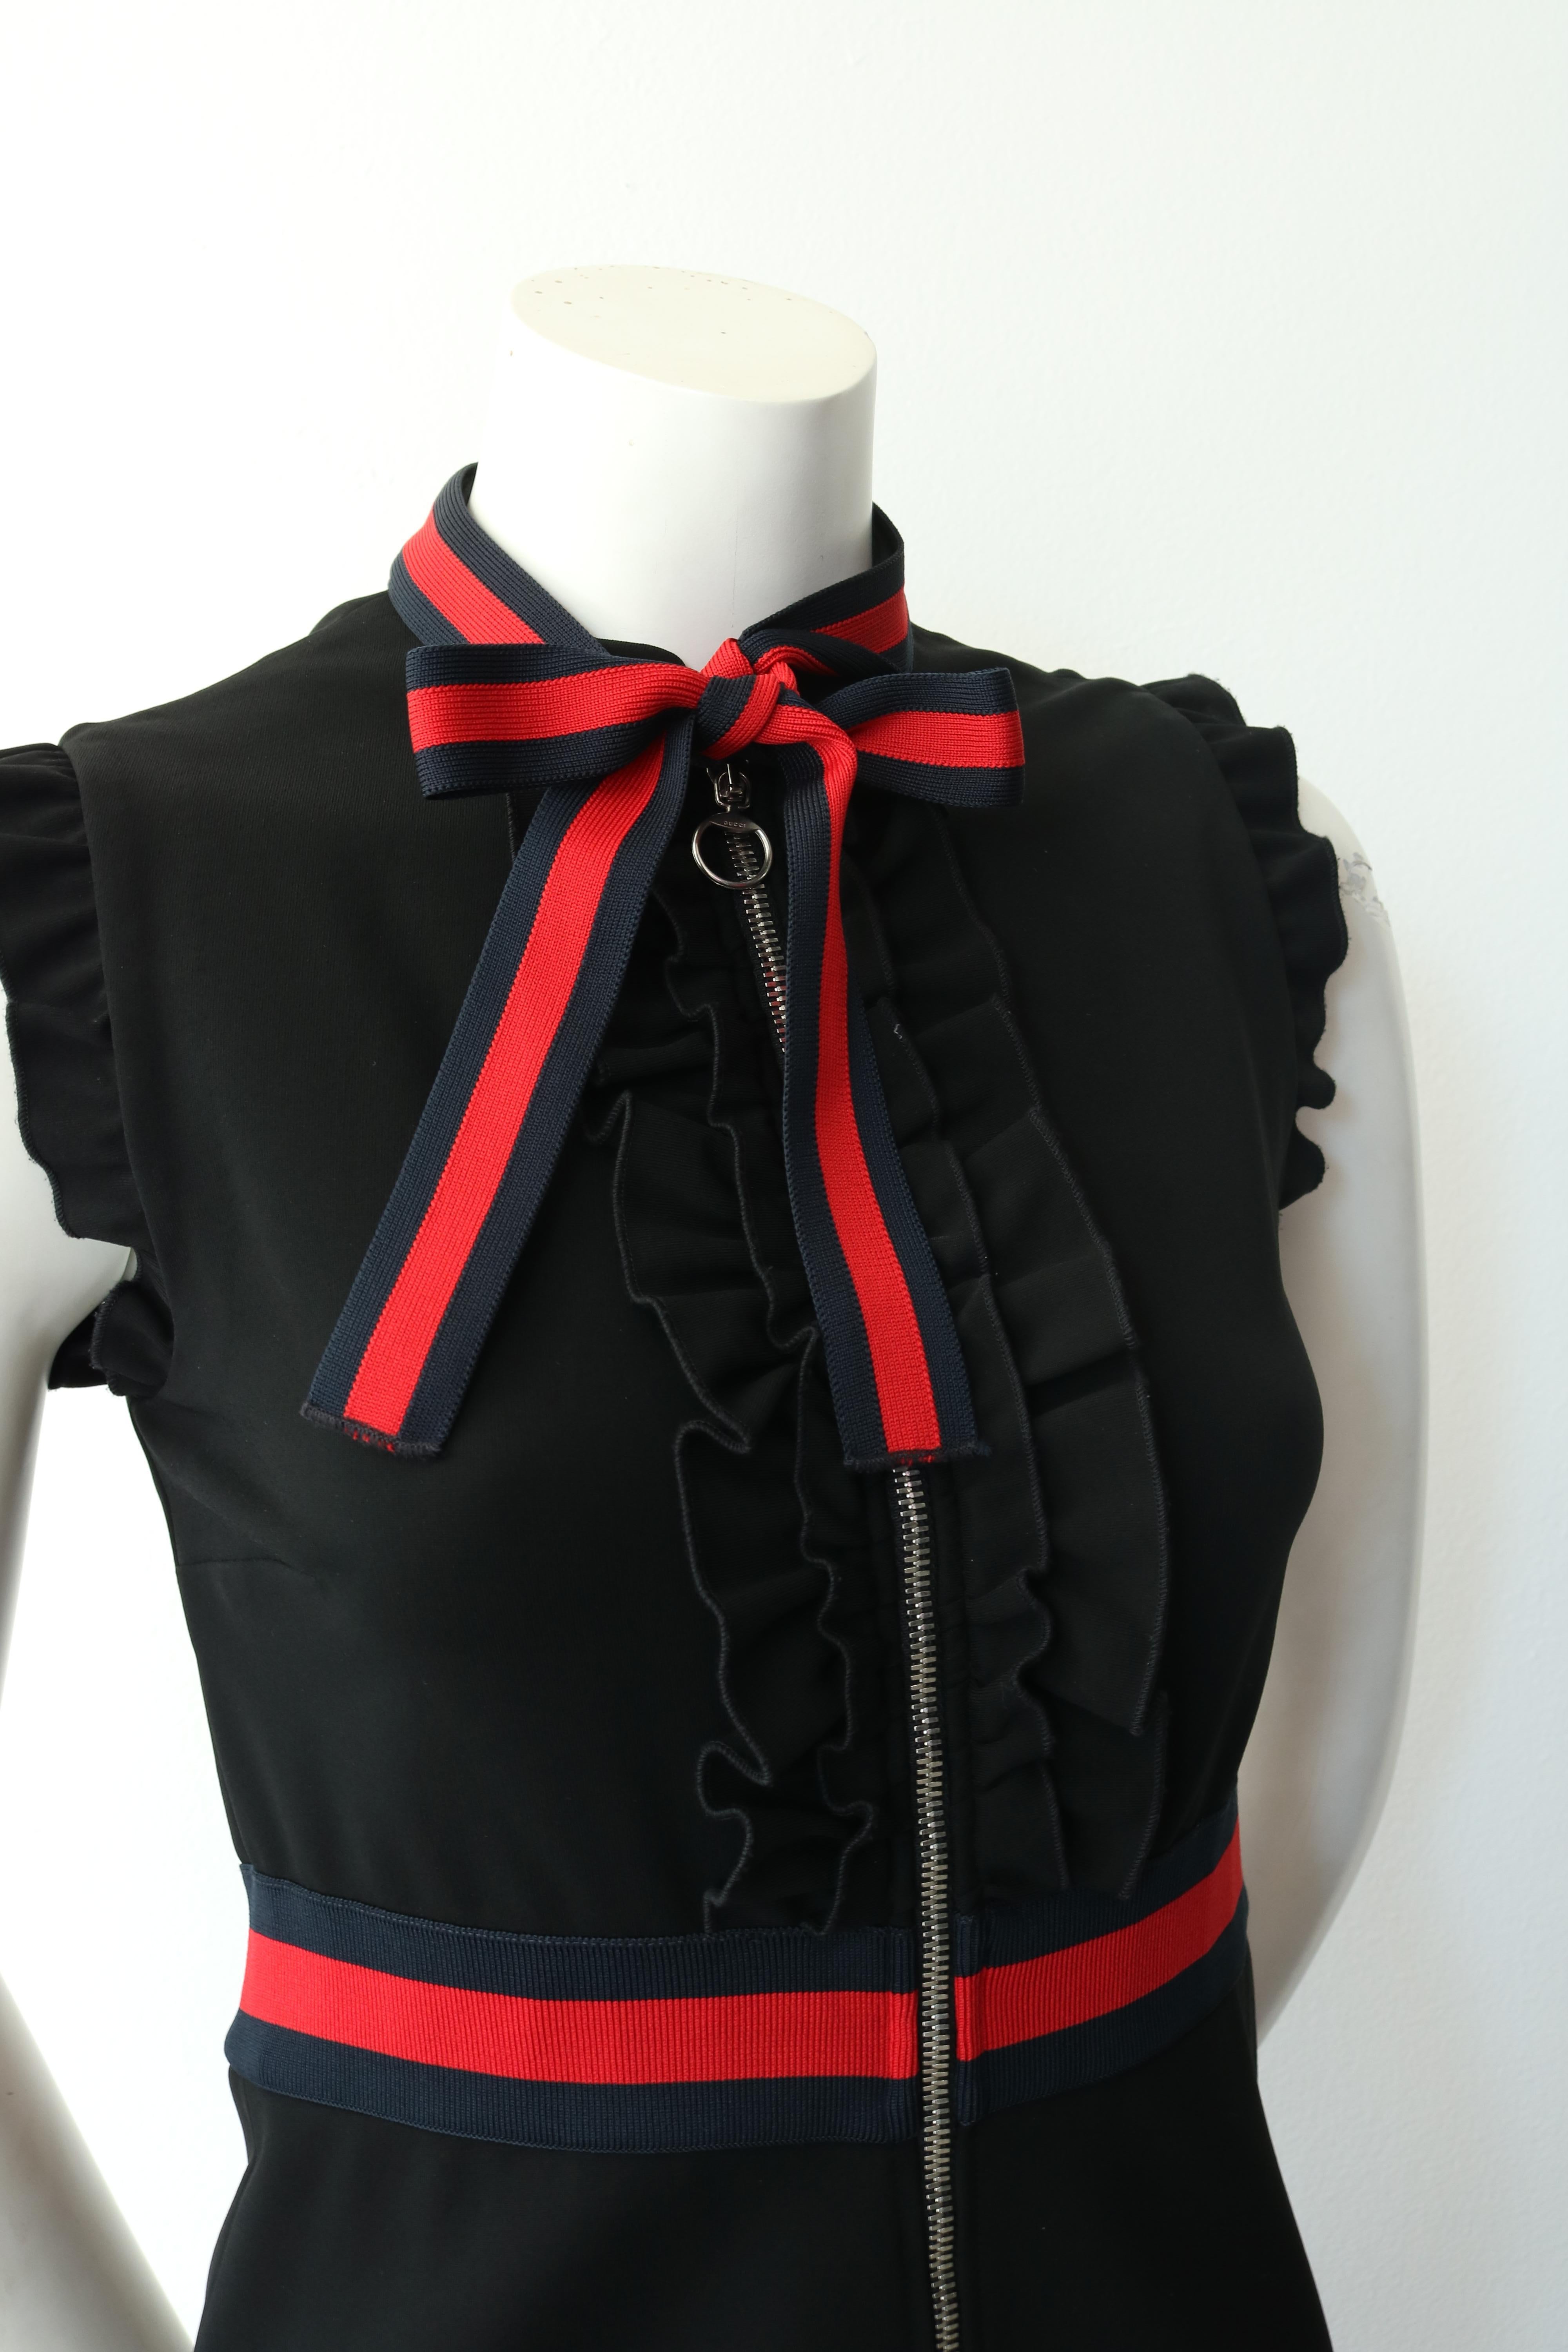 -The dress is further enhanced by knitted Web trim on the waistband and on the neckline knotted into a decorative bow. 
-Black compact viscose jersey with blue and red knitted Web detail. 
-Ruffle detail on front placket and sleeves. 
-Front zip.